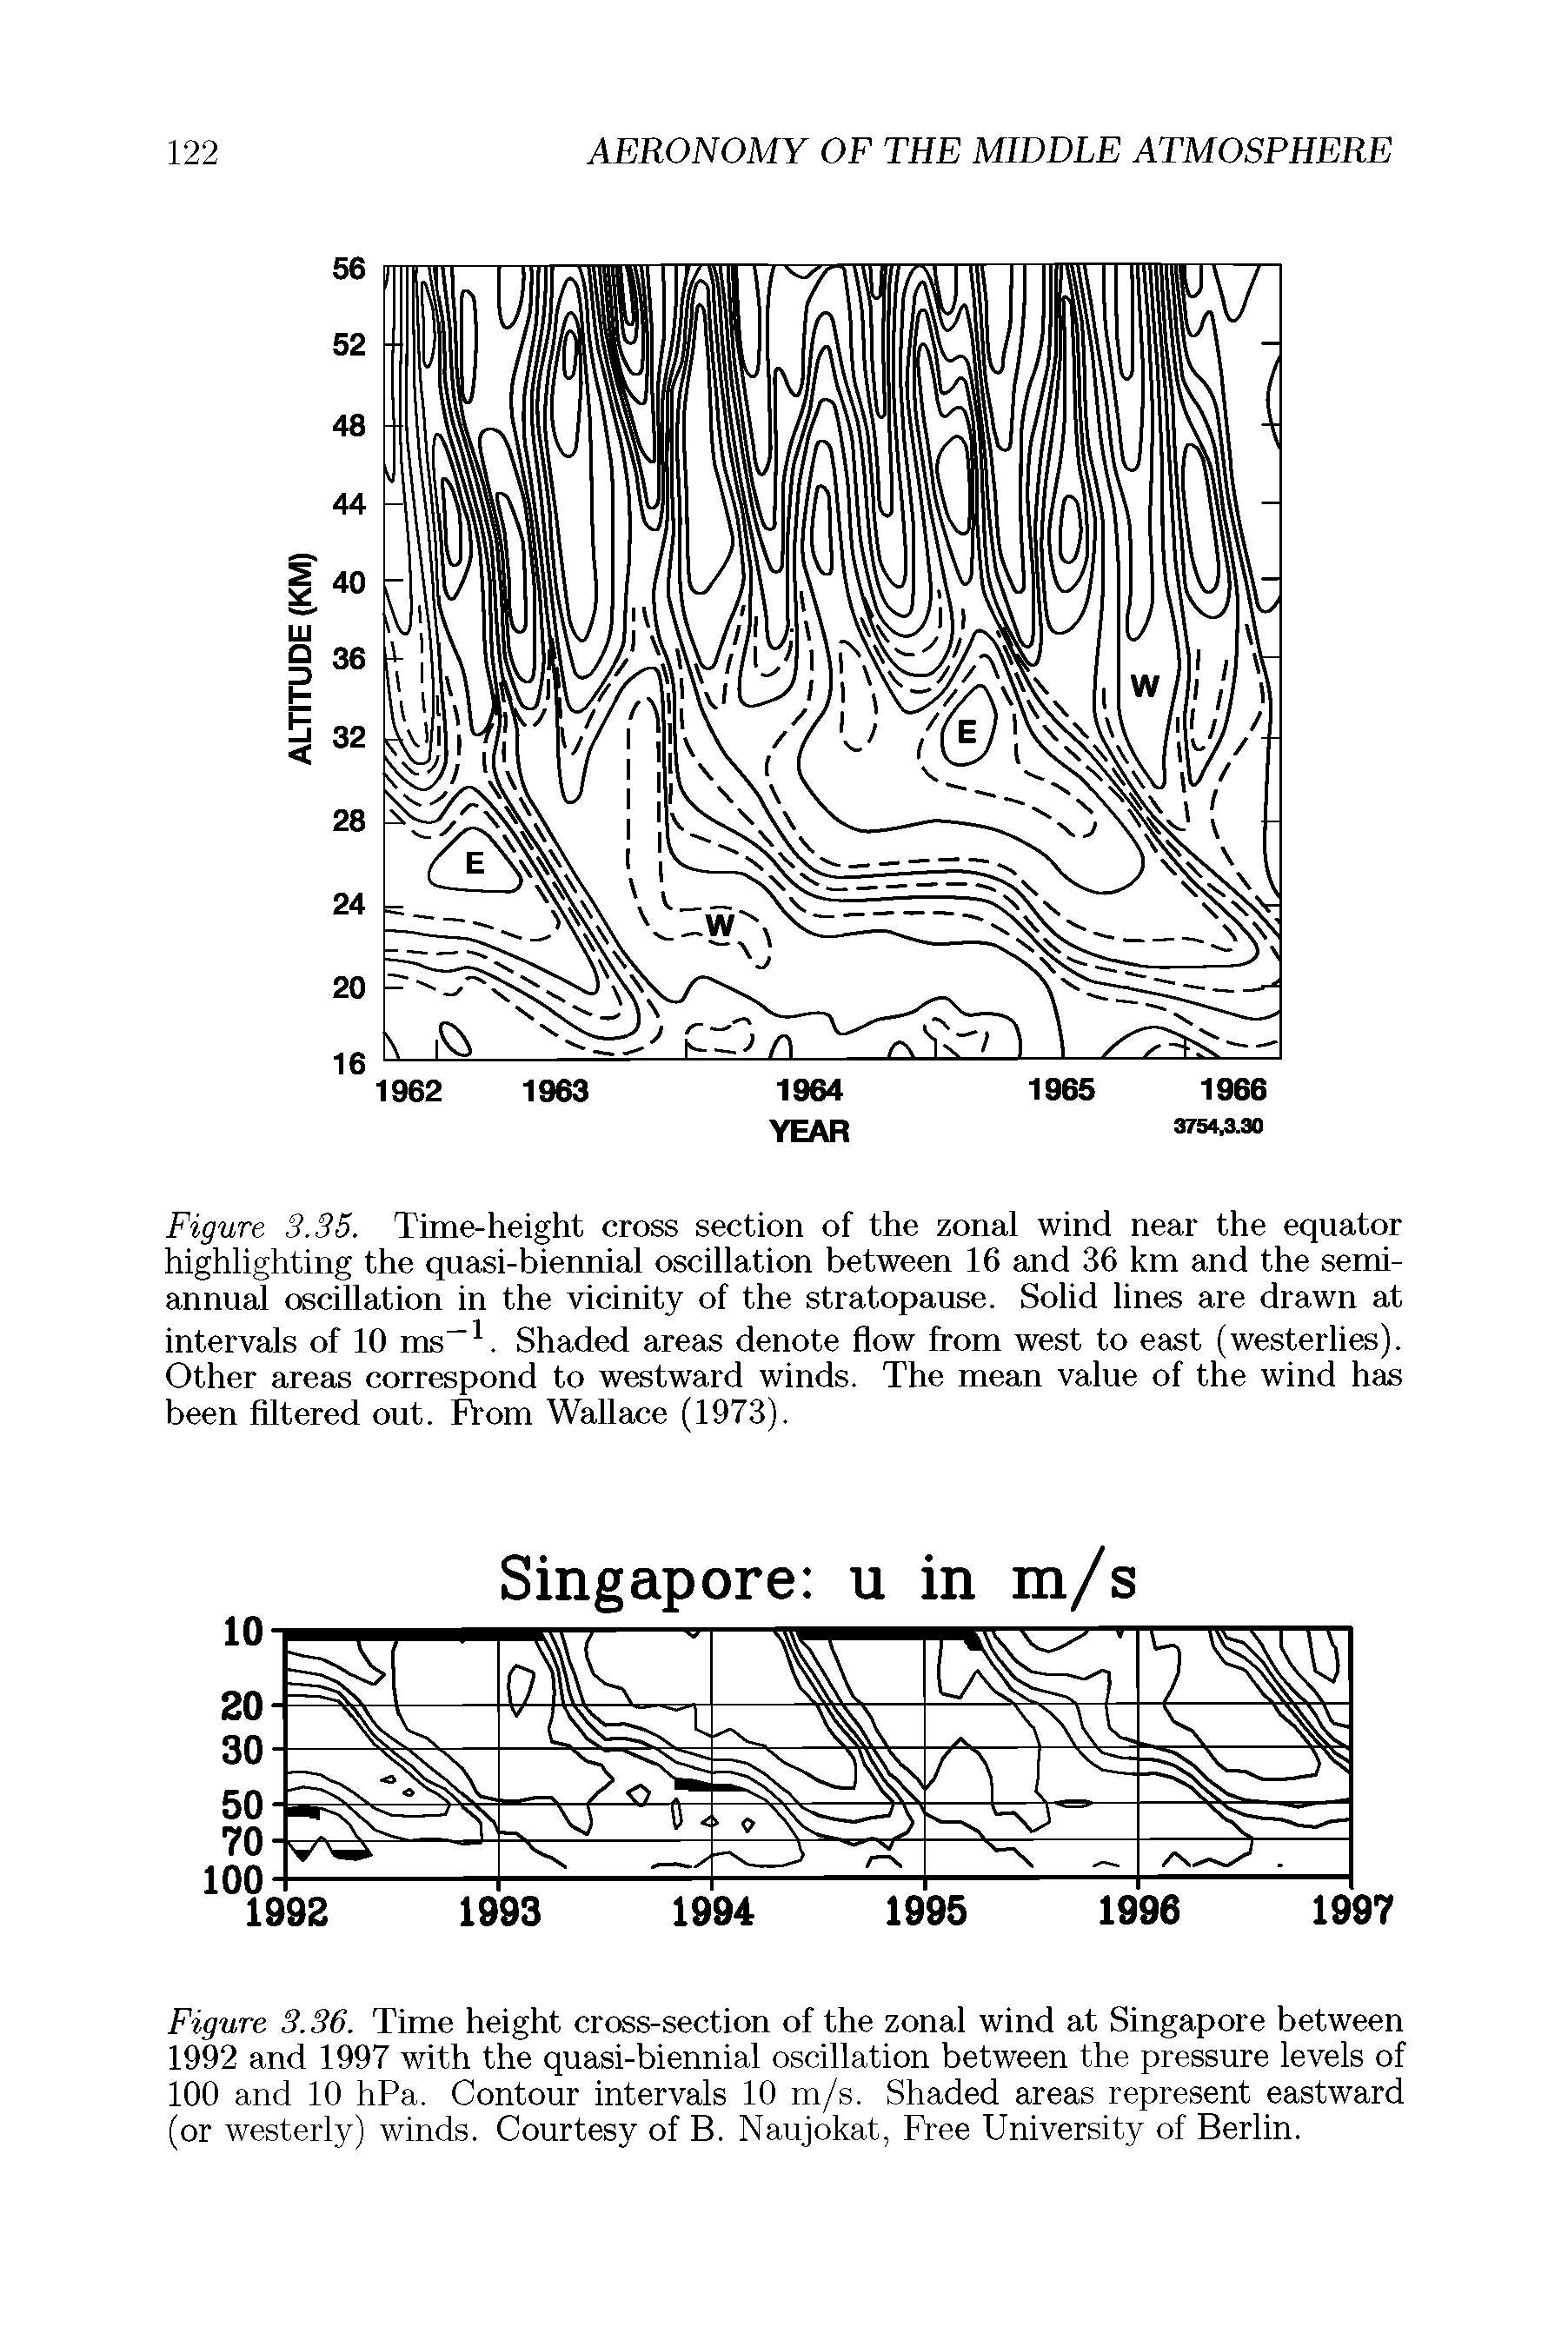 Figure 3.36. Time height cross-section of the zonal wind at Singapore between 1992 and 1997 with the quasi-biennial oscillation between the pressure levels of 100 and 10 hPa. Contour intervals 10 m/s. Shaded areas represent eastward (or westerly) winds. Courtesy of B. Naujokat, Free University of Berlin.